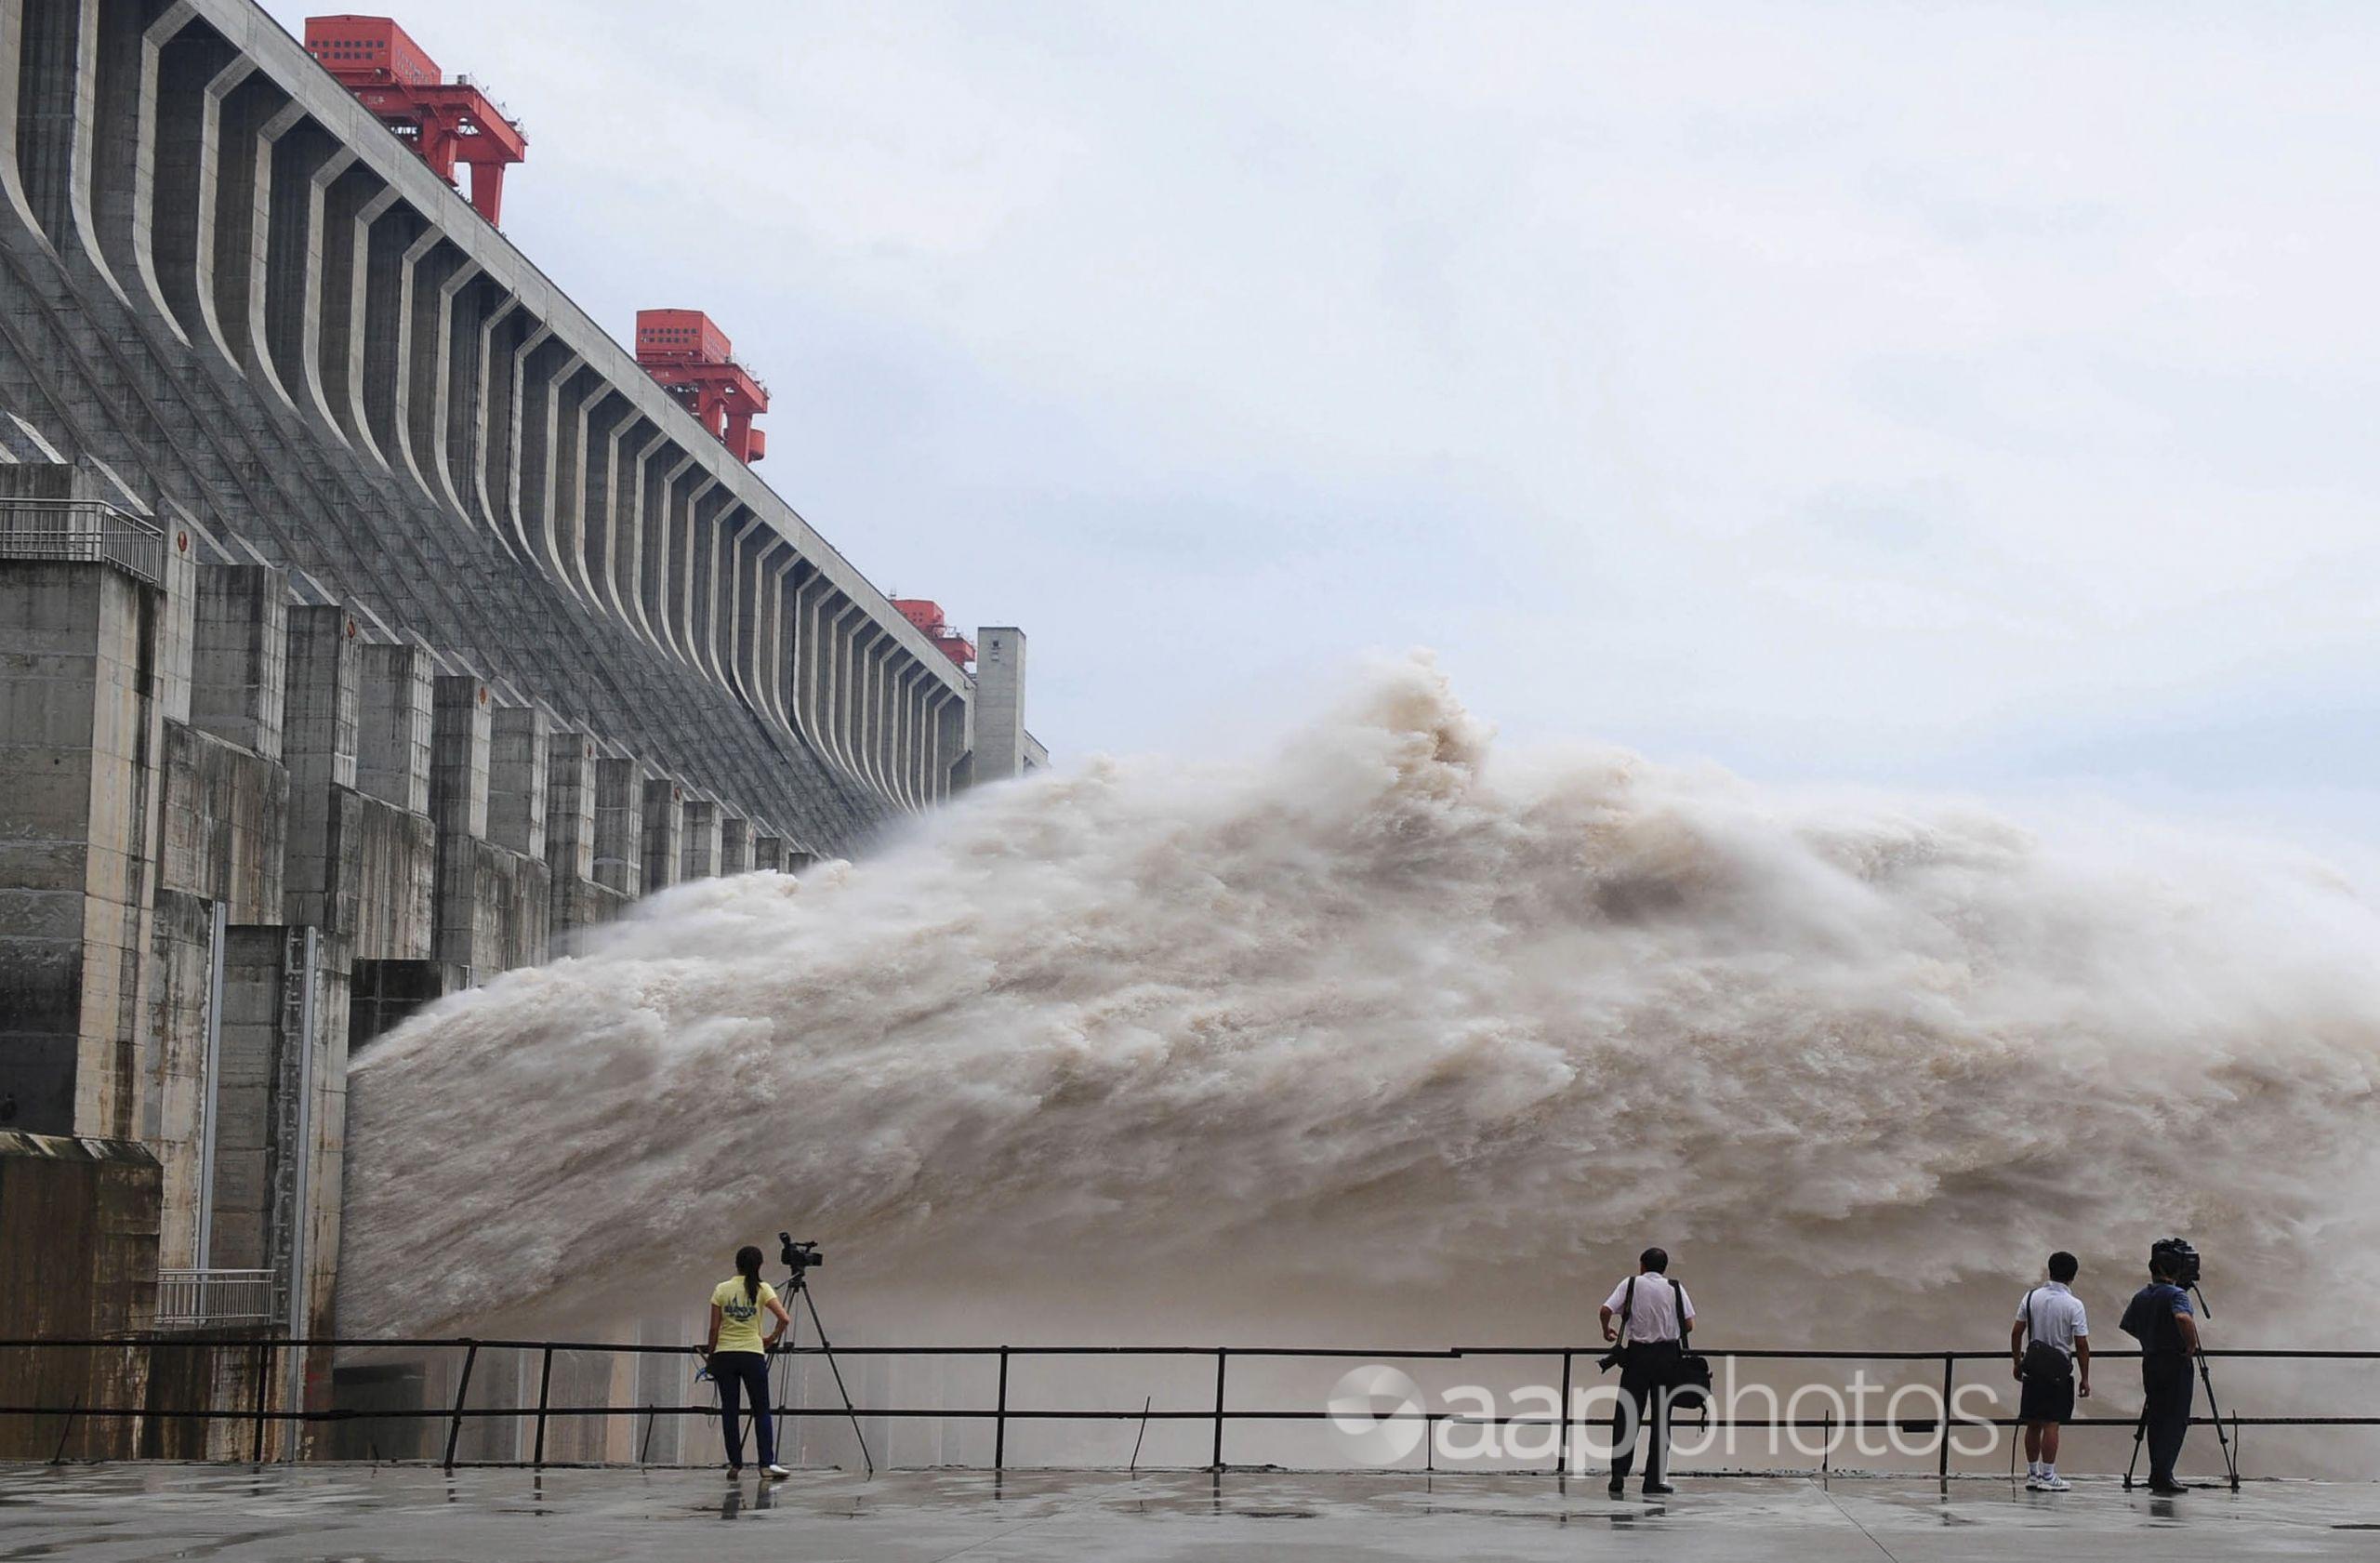 Floodwater released from the Three Gorges Dam in 2010.